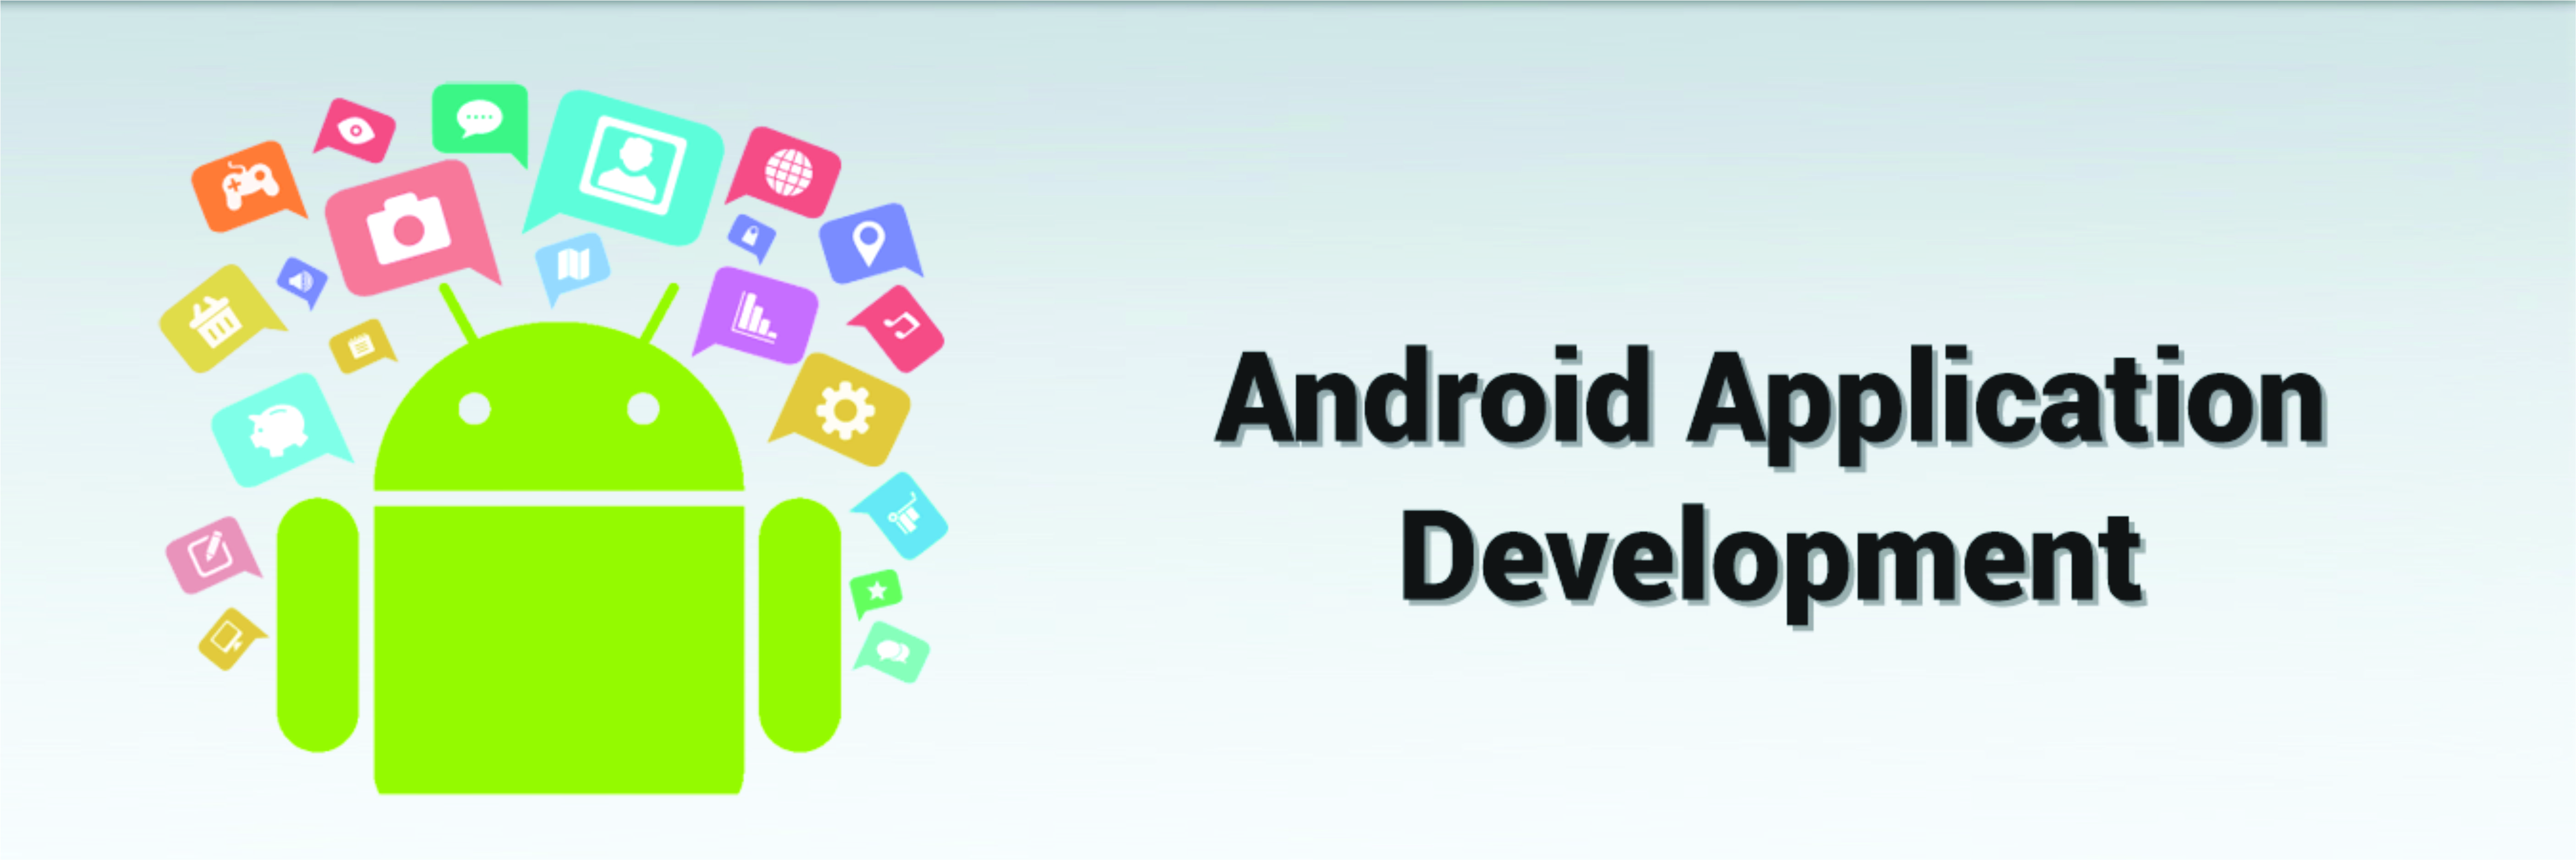 Android application development Training in Nepal, Best Android